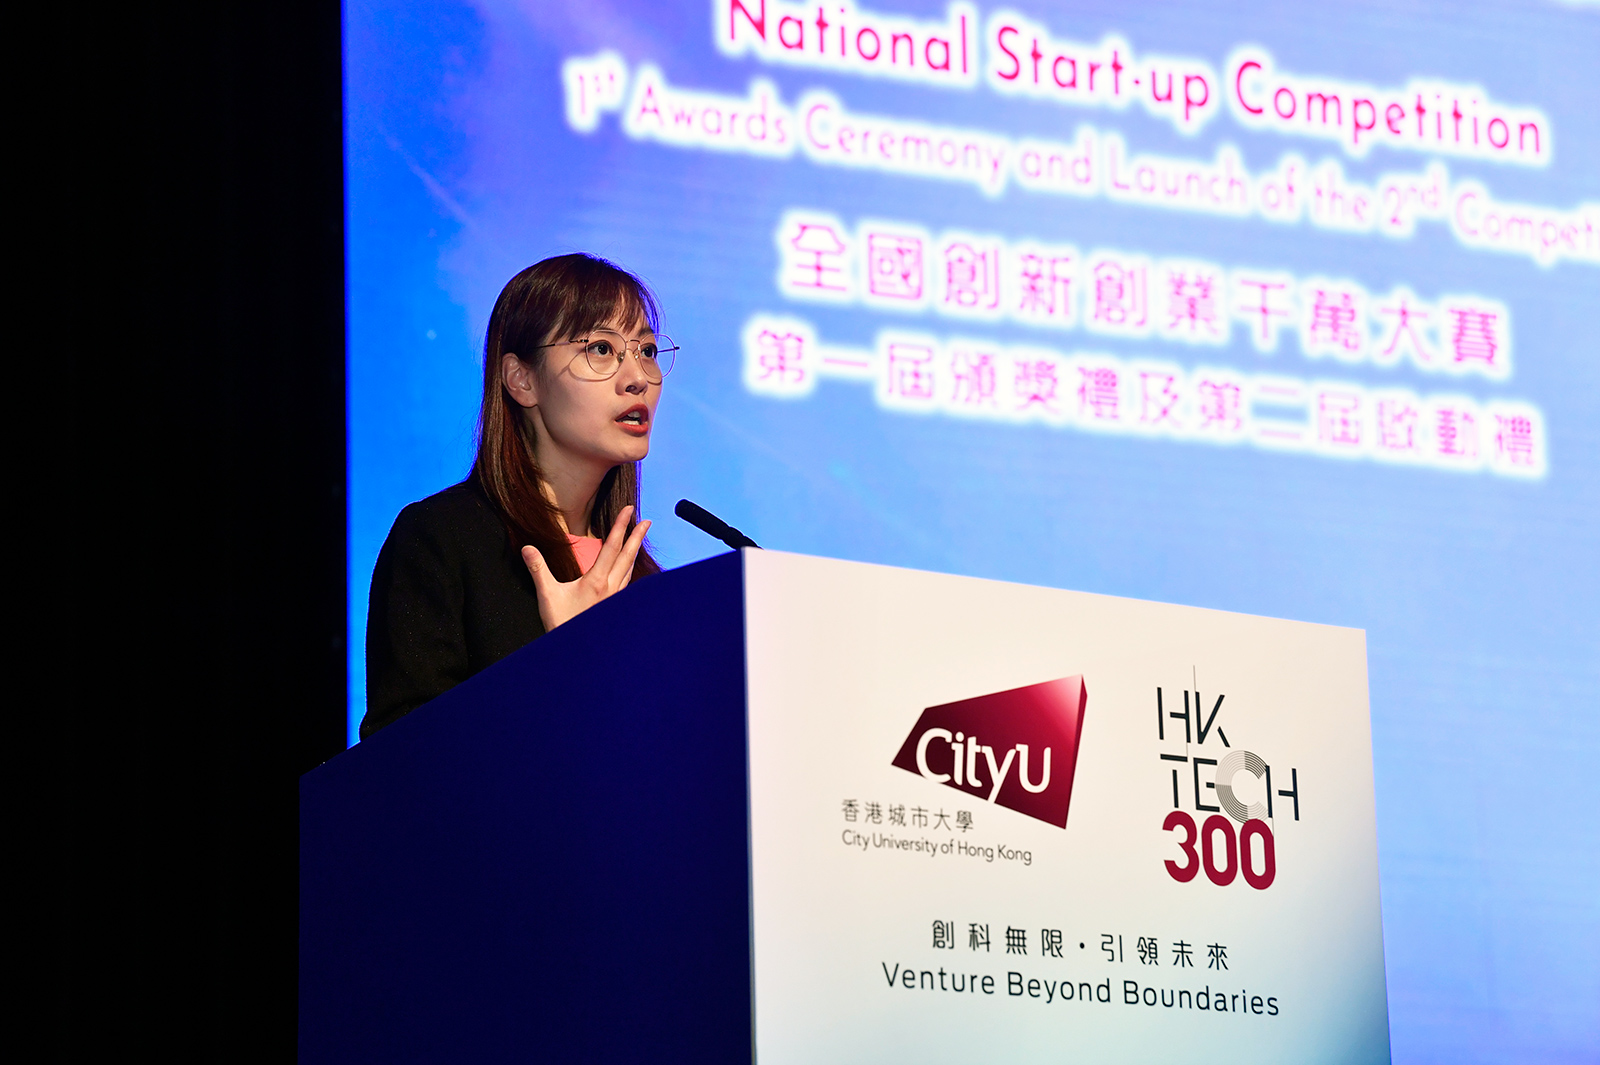 Speech by Under Secretary for Innovation, Technology and Industry, HKSAR Government.